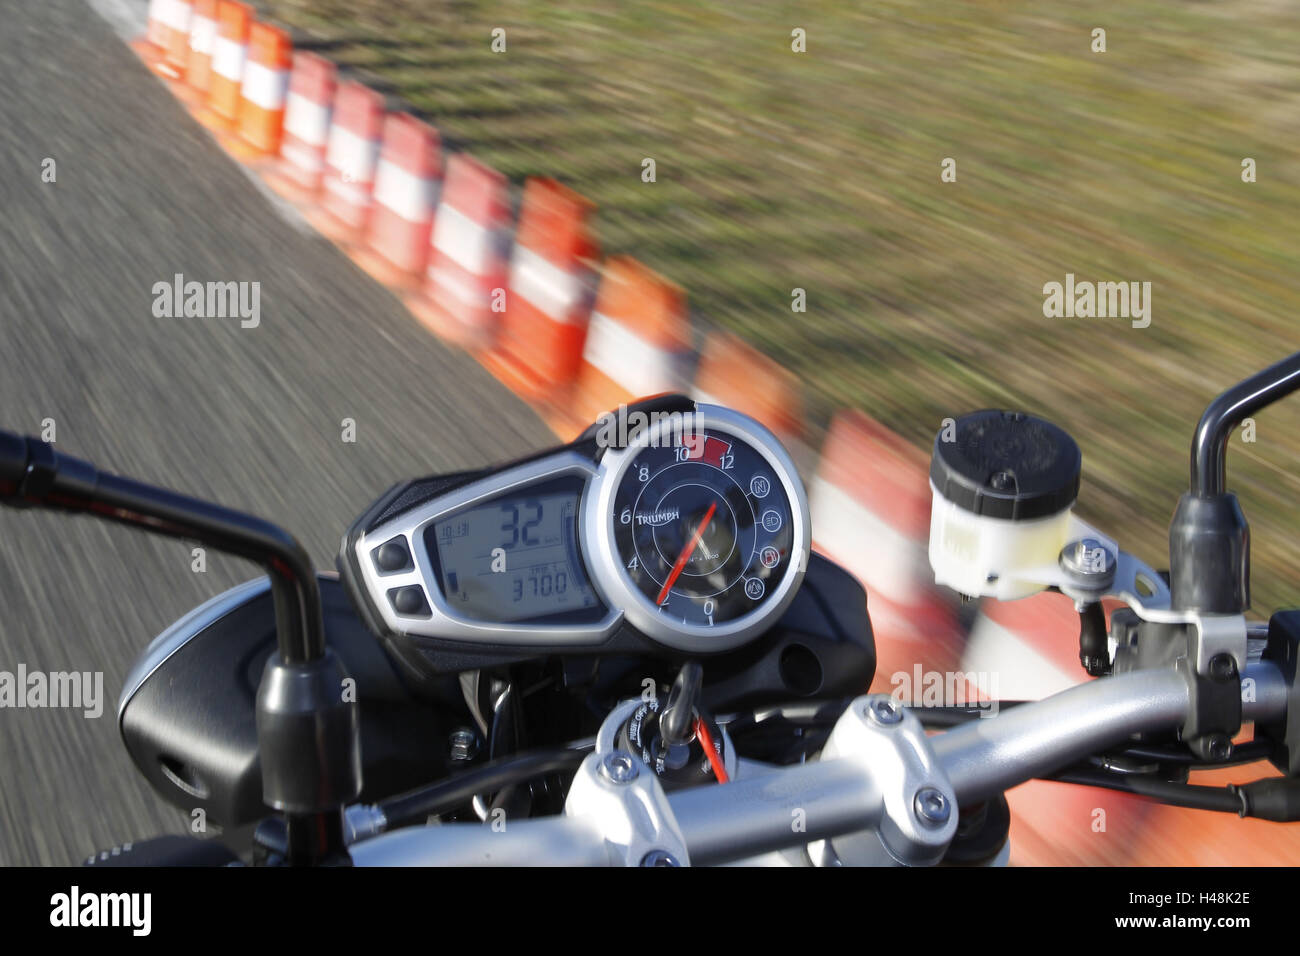 Motorcycle, measuring journey, pylon, view about cockpit, Stock Photo